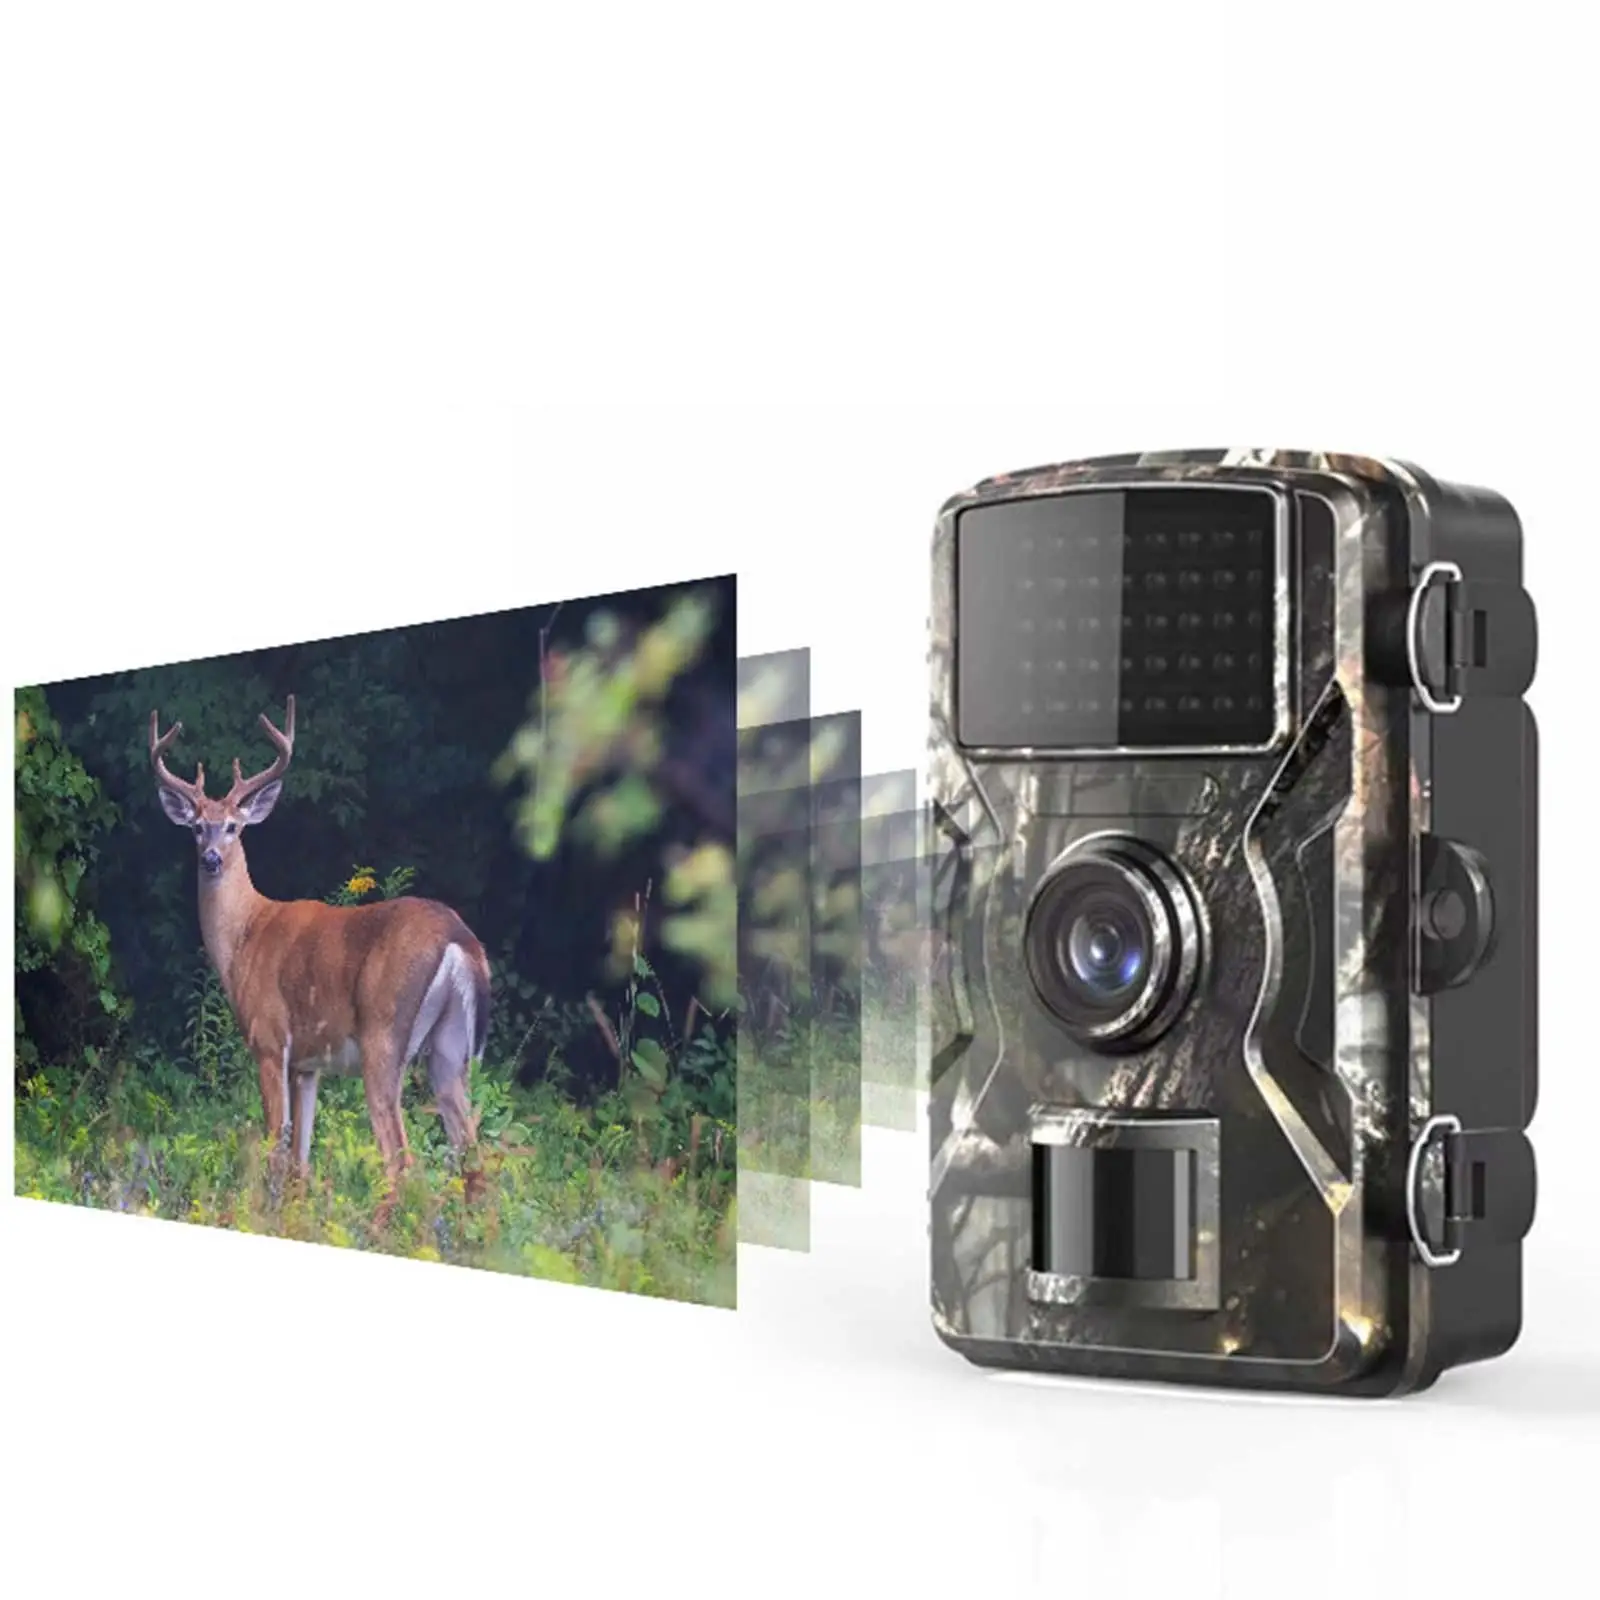 1920x1080 Trail Camera 49ft Vision for Wildlife Viewing Crop